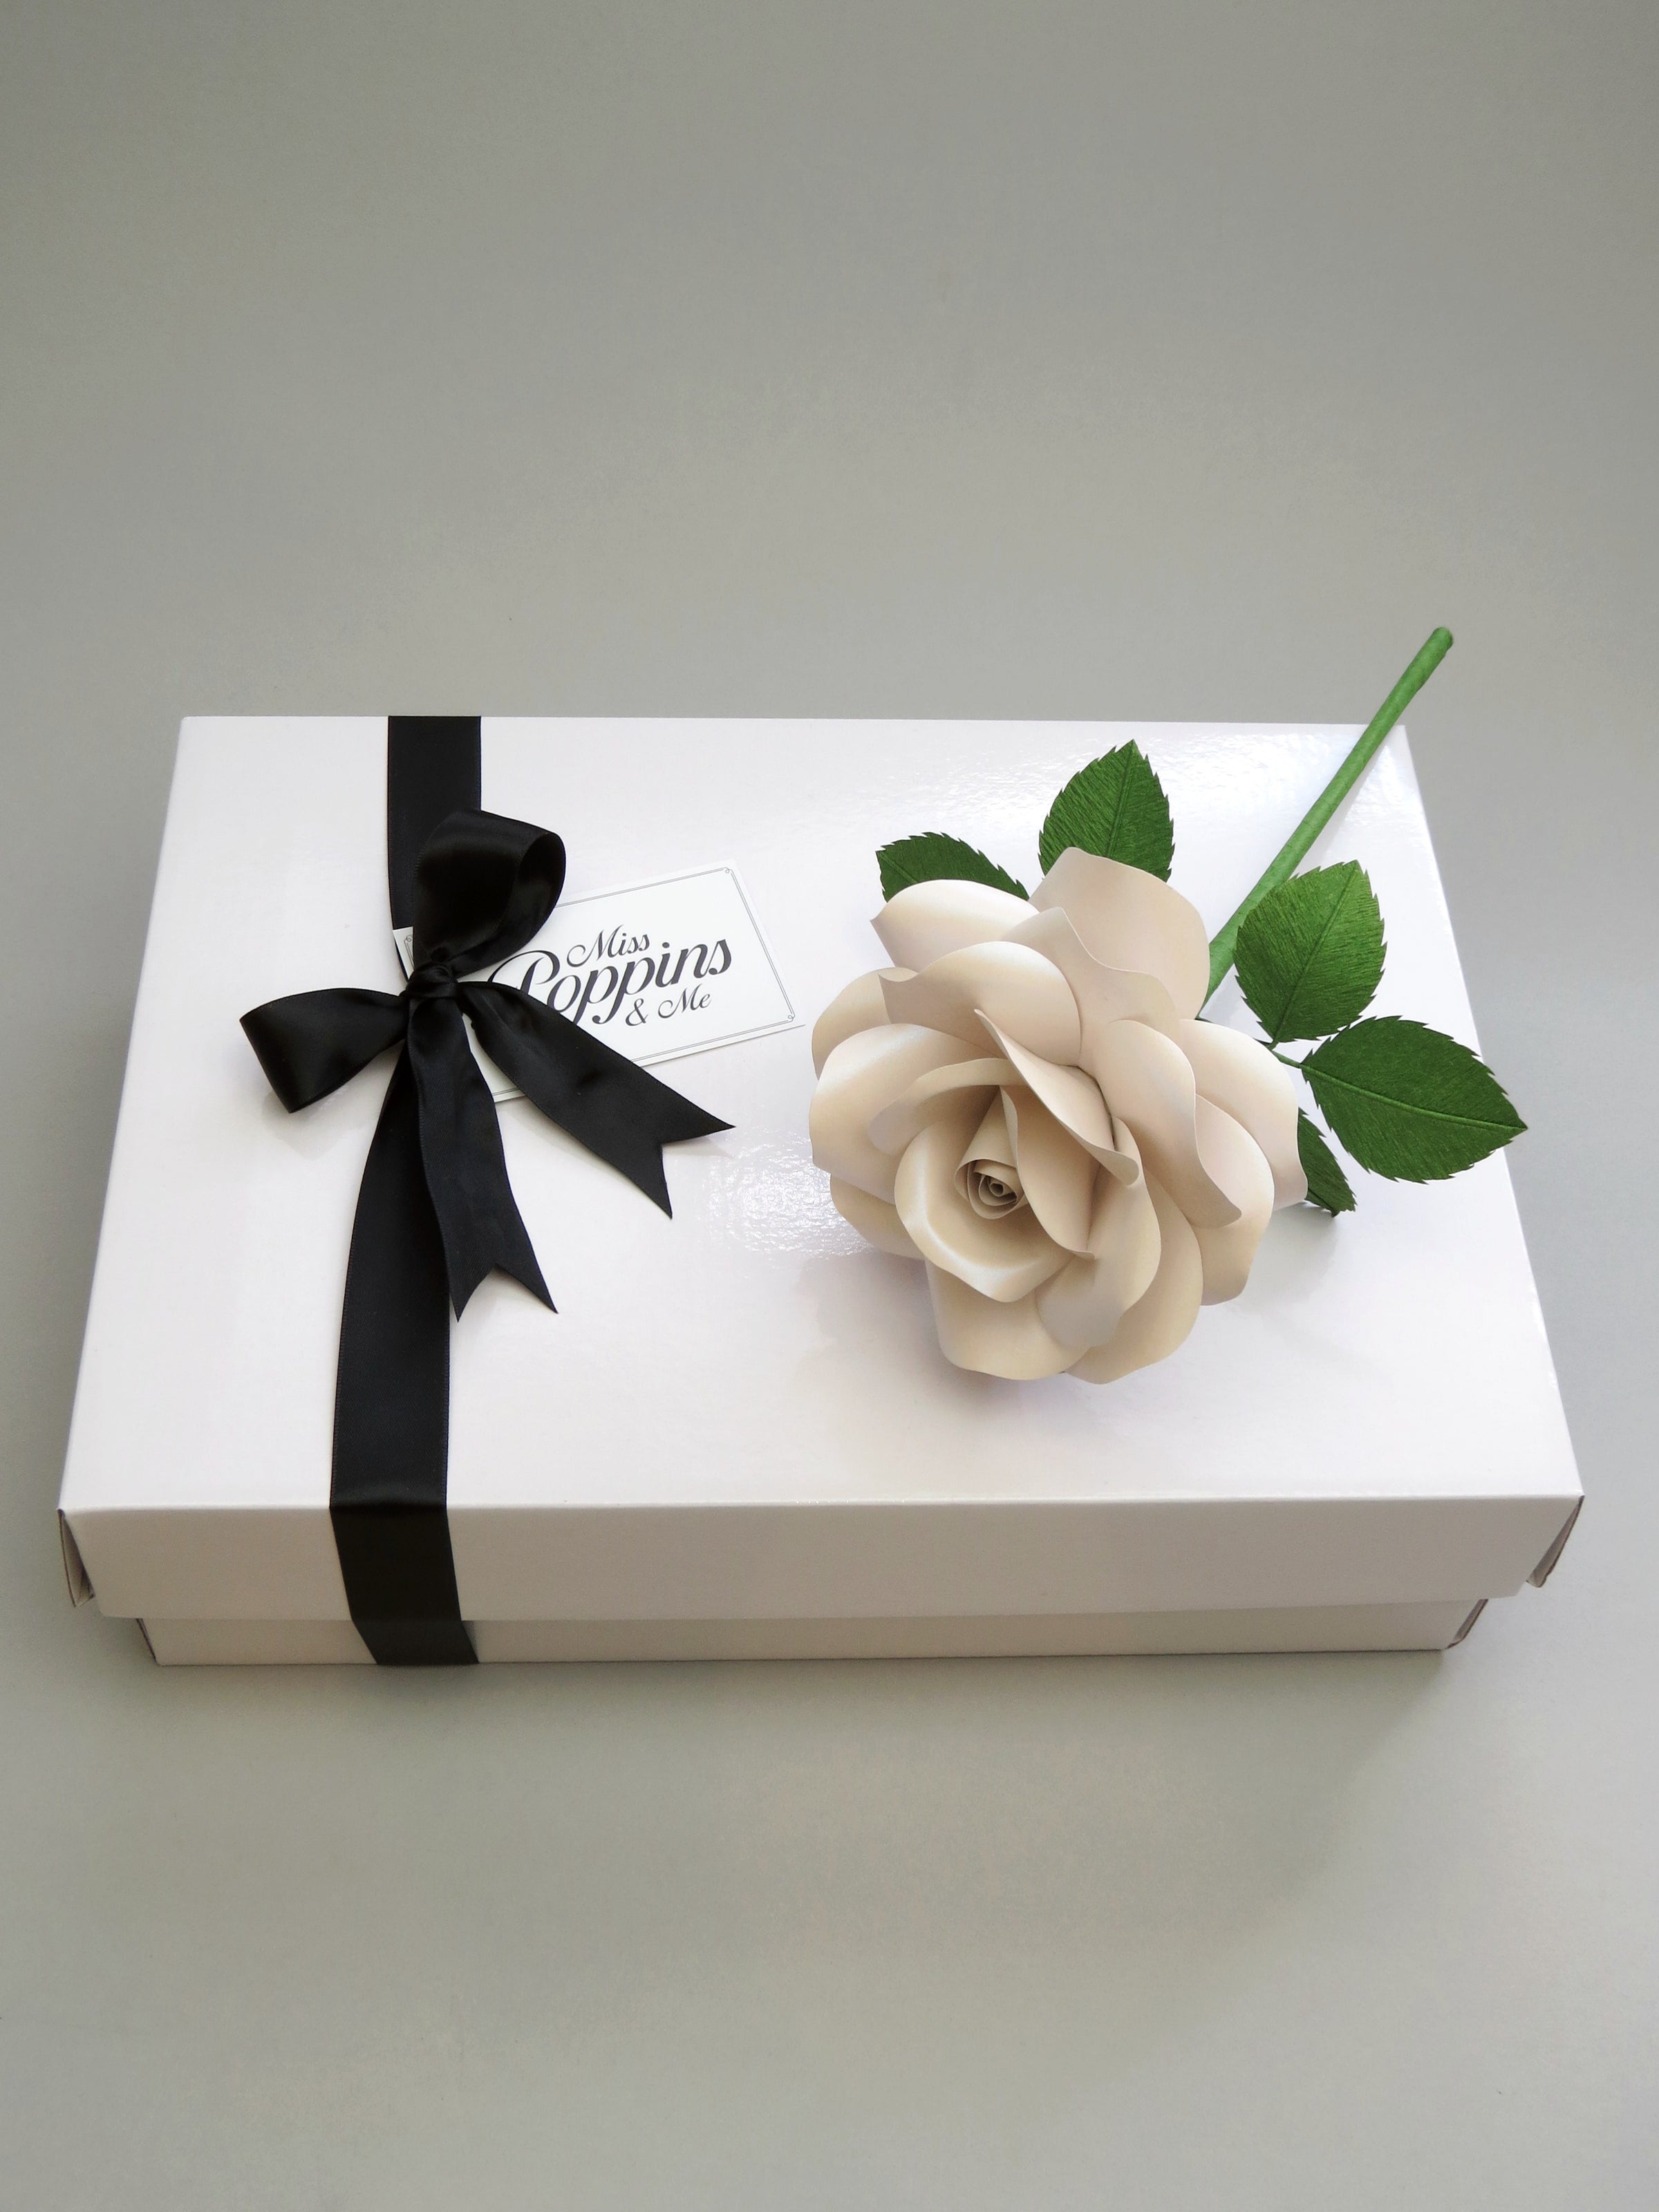 Shimmery pearl paper rose lying diagonally on top of a luxury white gift box that has a black satin ribbon tied in a bow with a Miss Poppins and Me gift tag attached